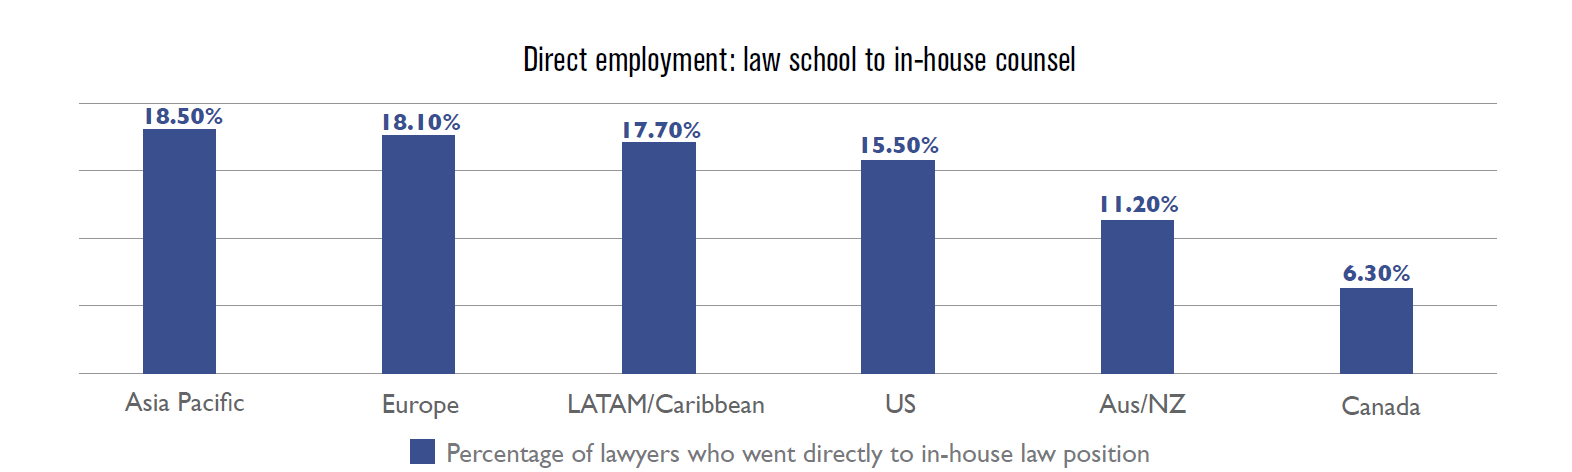 Direct employment: law school to in-house counsel